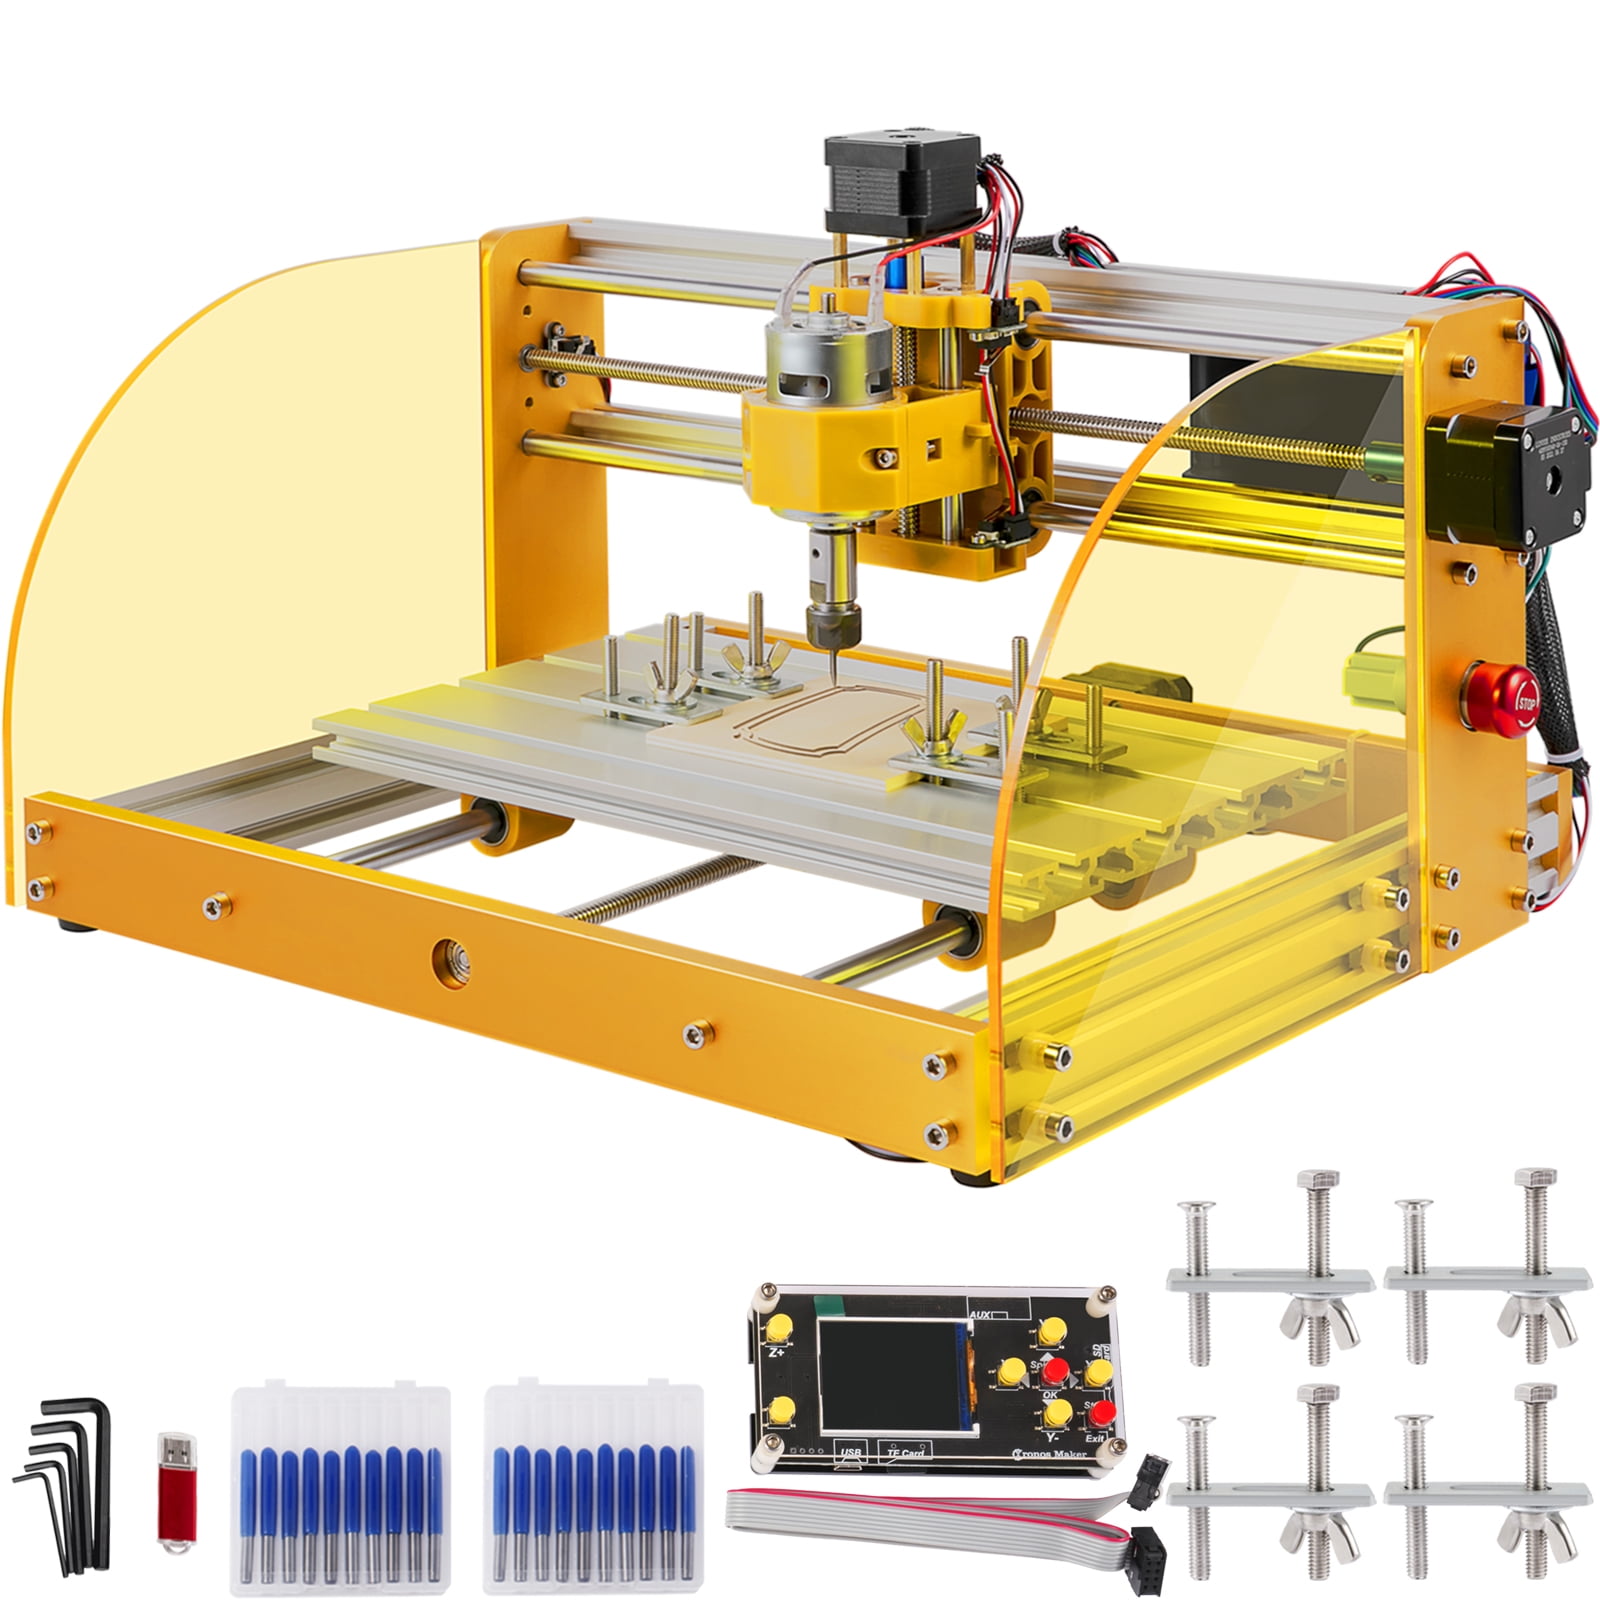 CNC 3018 DIY Rouyer &2.5w Laser Engraving Carving PCB Milling Cutting Machine for sale online 